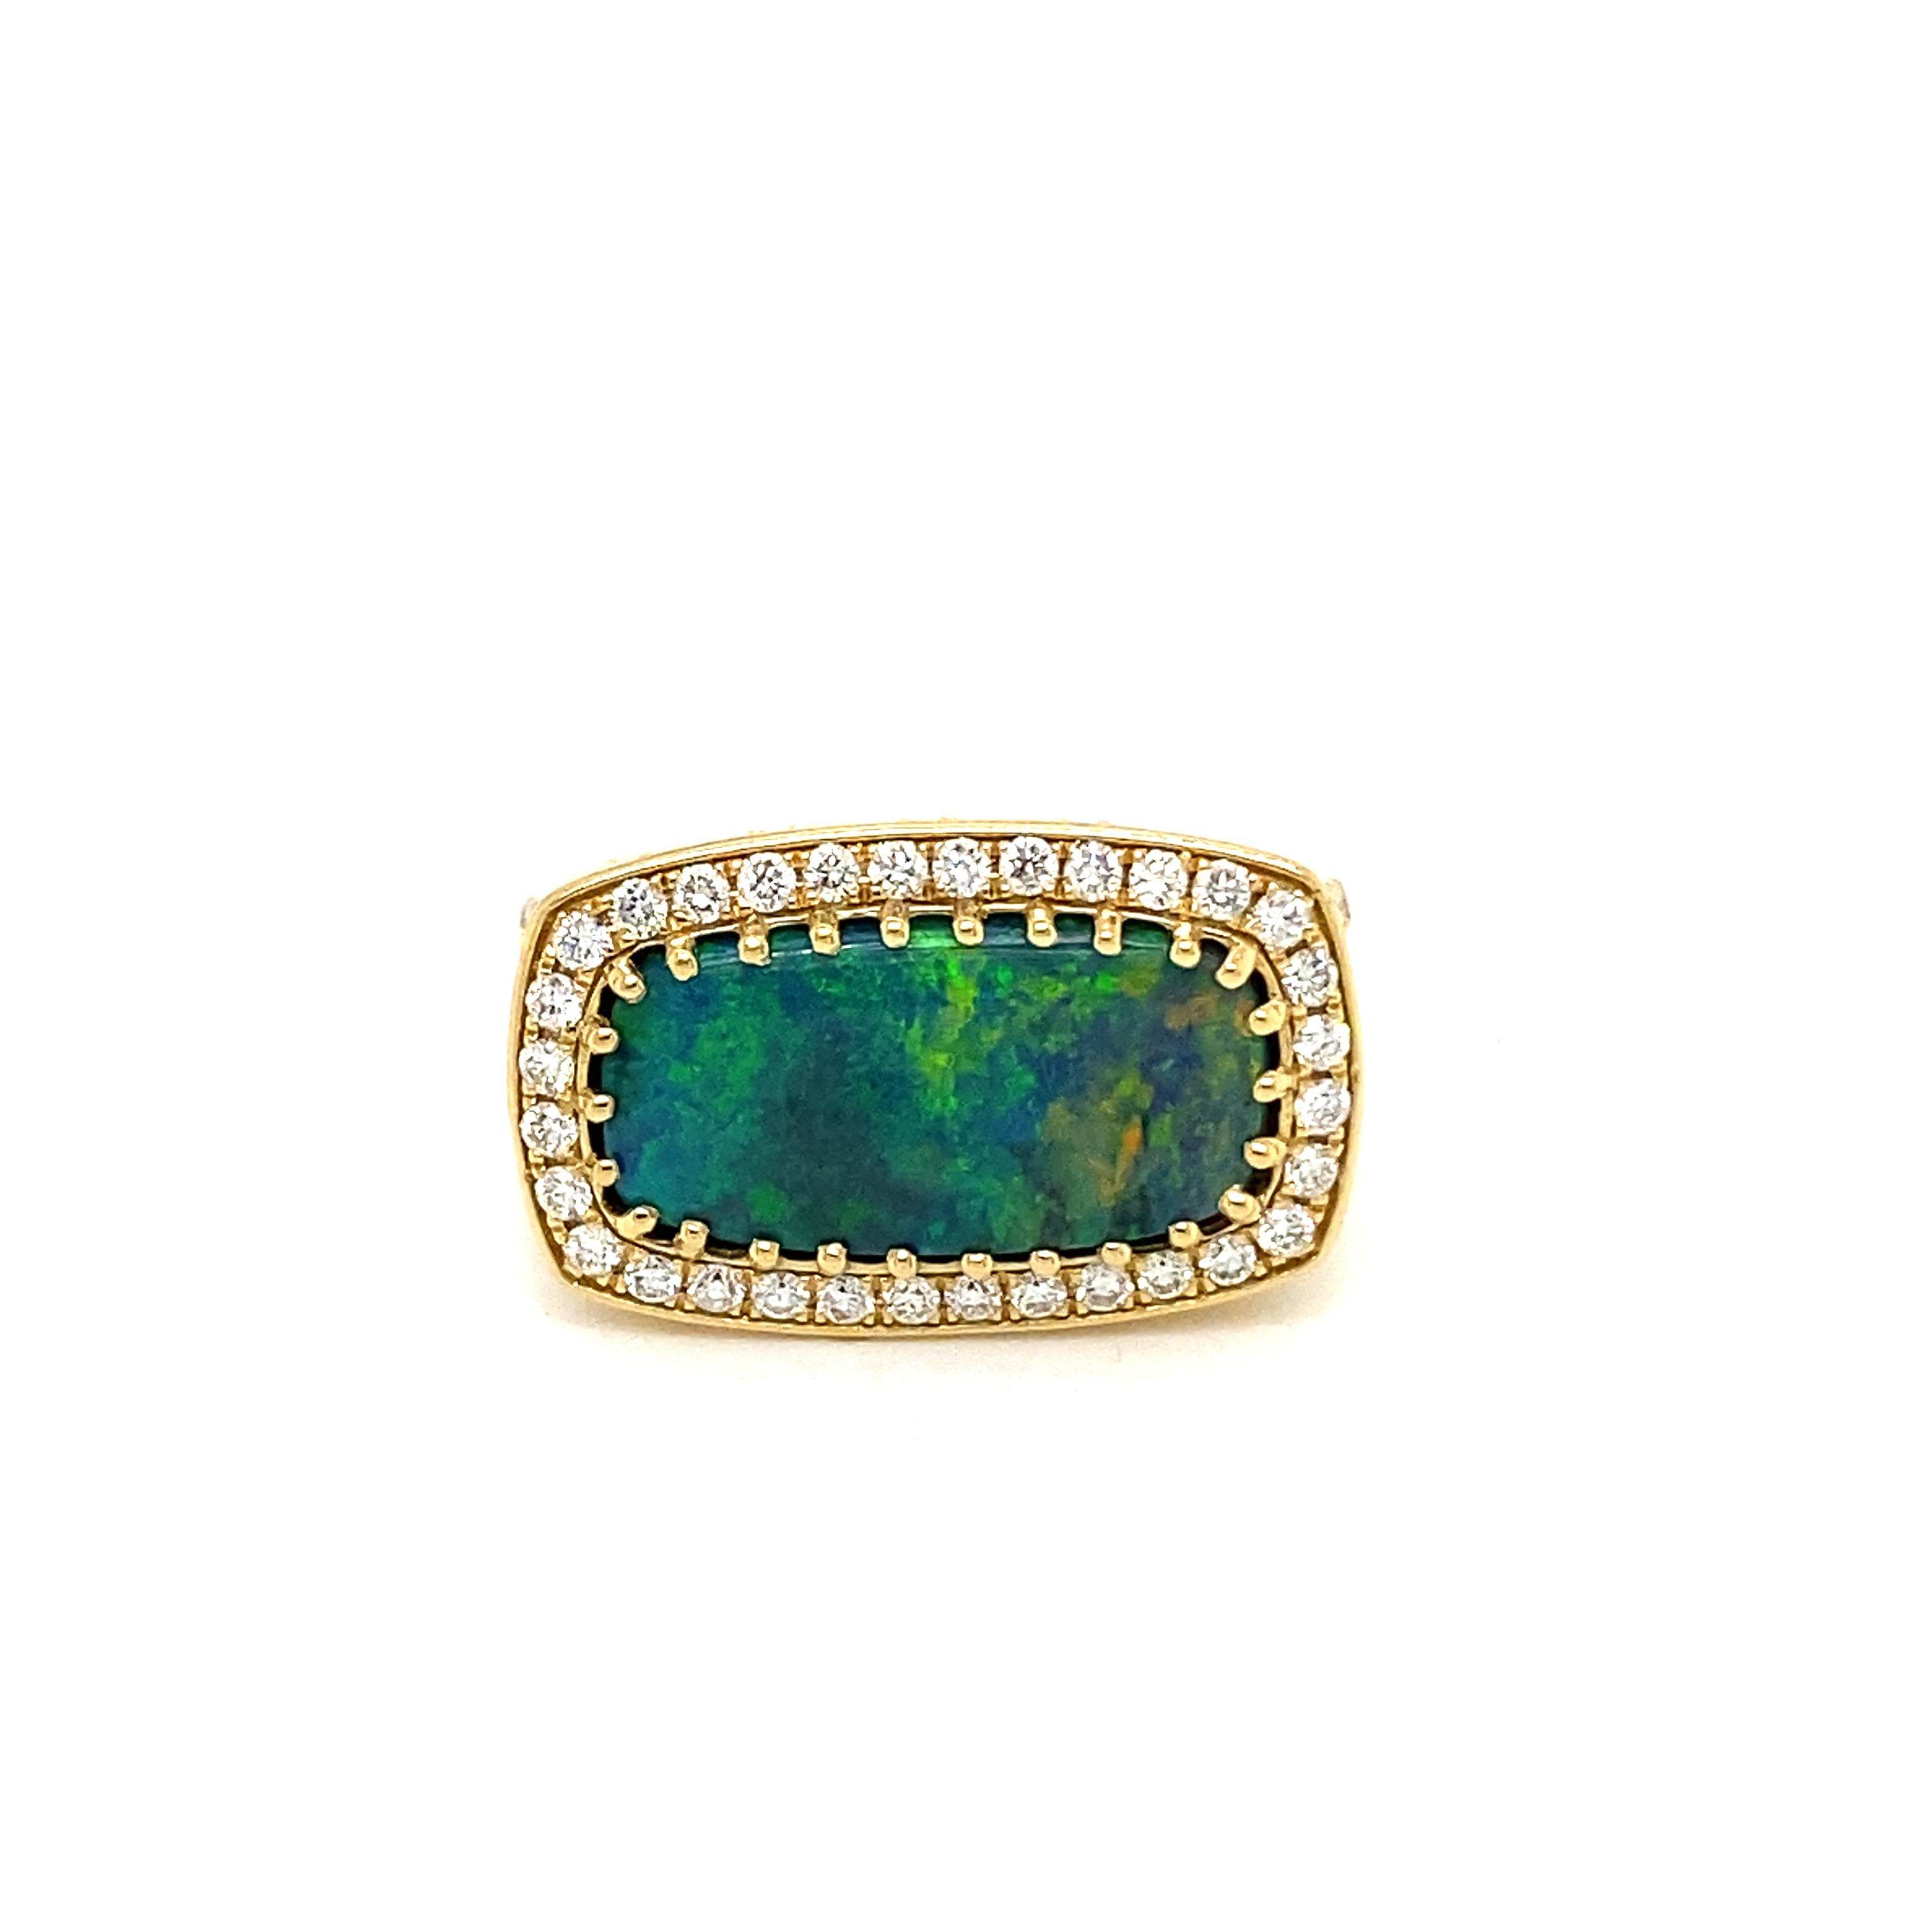 This stunning cocktail ring showcases a beautiful 3.67 Carat Lightning Ridge Cushion Black Opal with a Diamond Halo on a Diamond Shank. This ring is set in 18k Yellow Gold, with 18k yellow gold prongs on the center stone.
Total Diamond Weight = 0.78